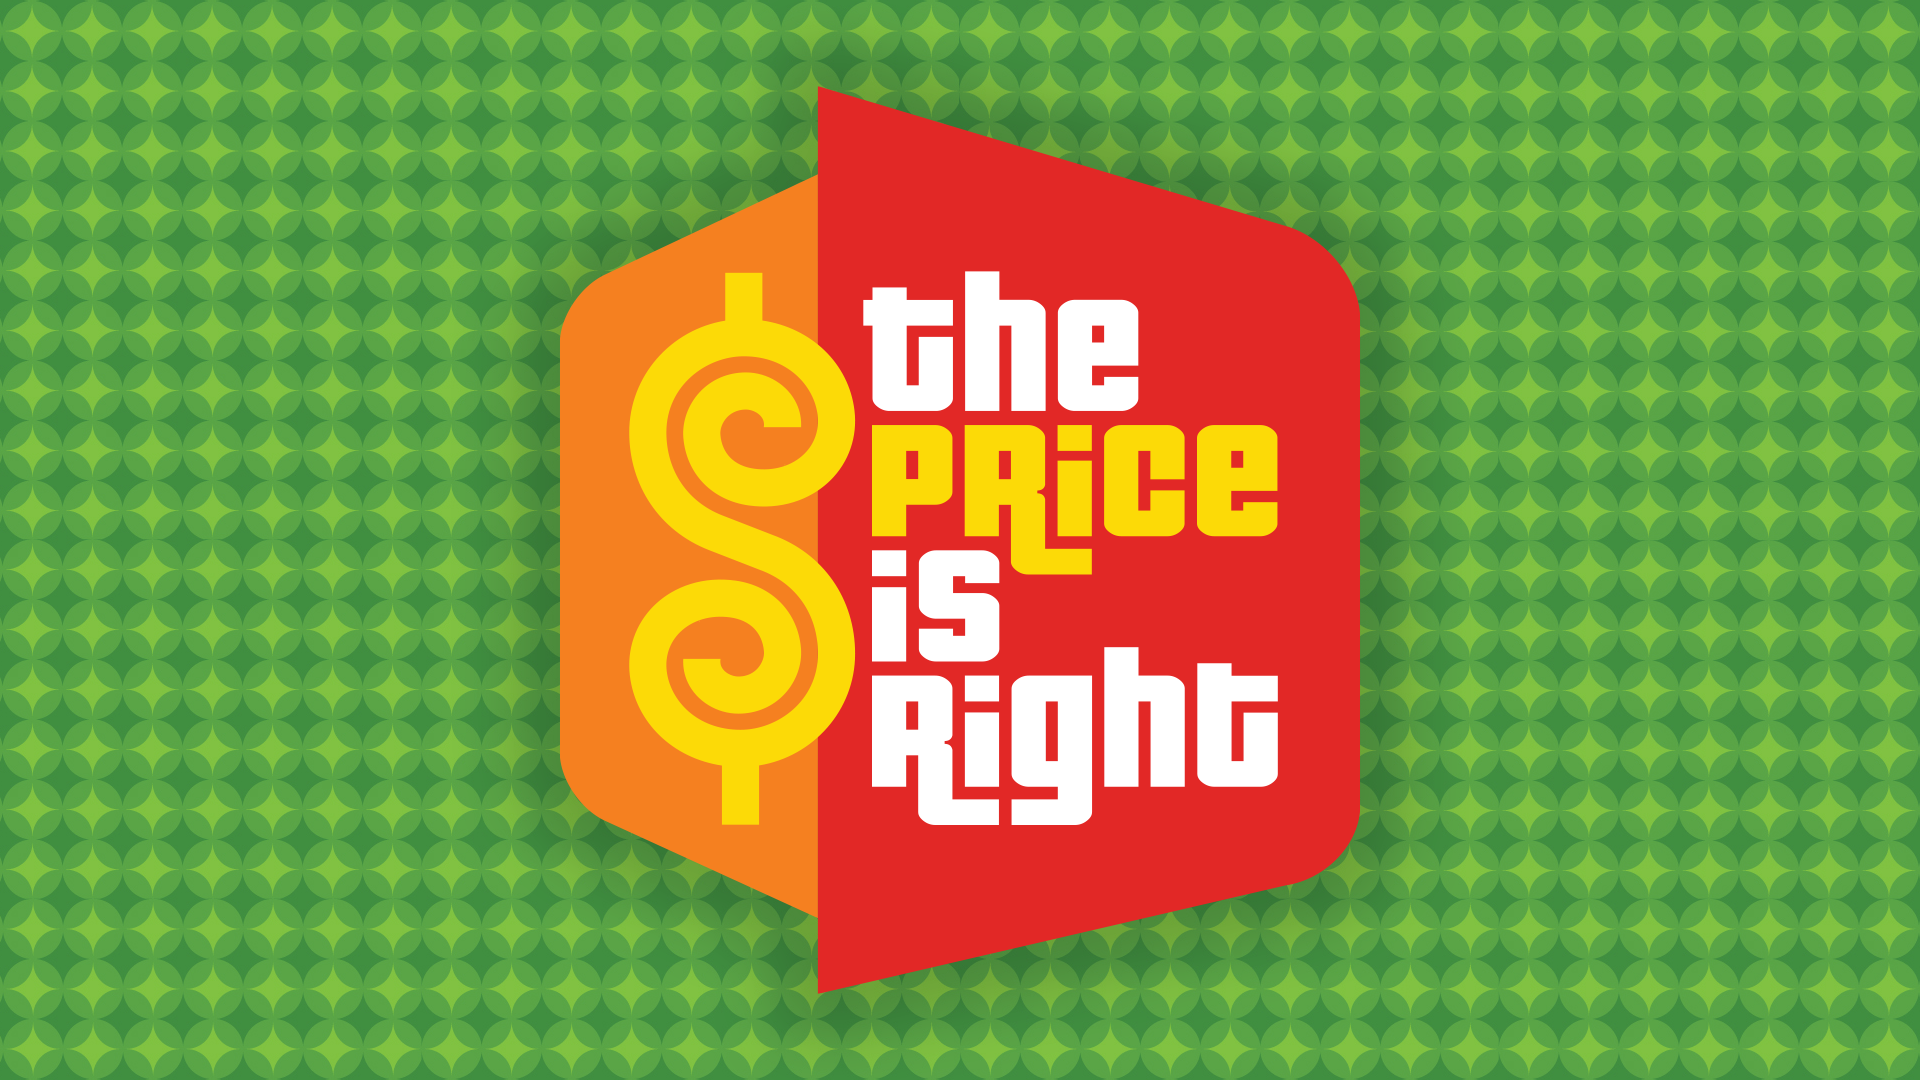 price is right live